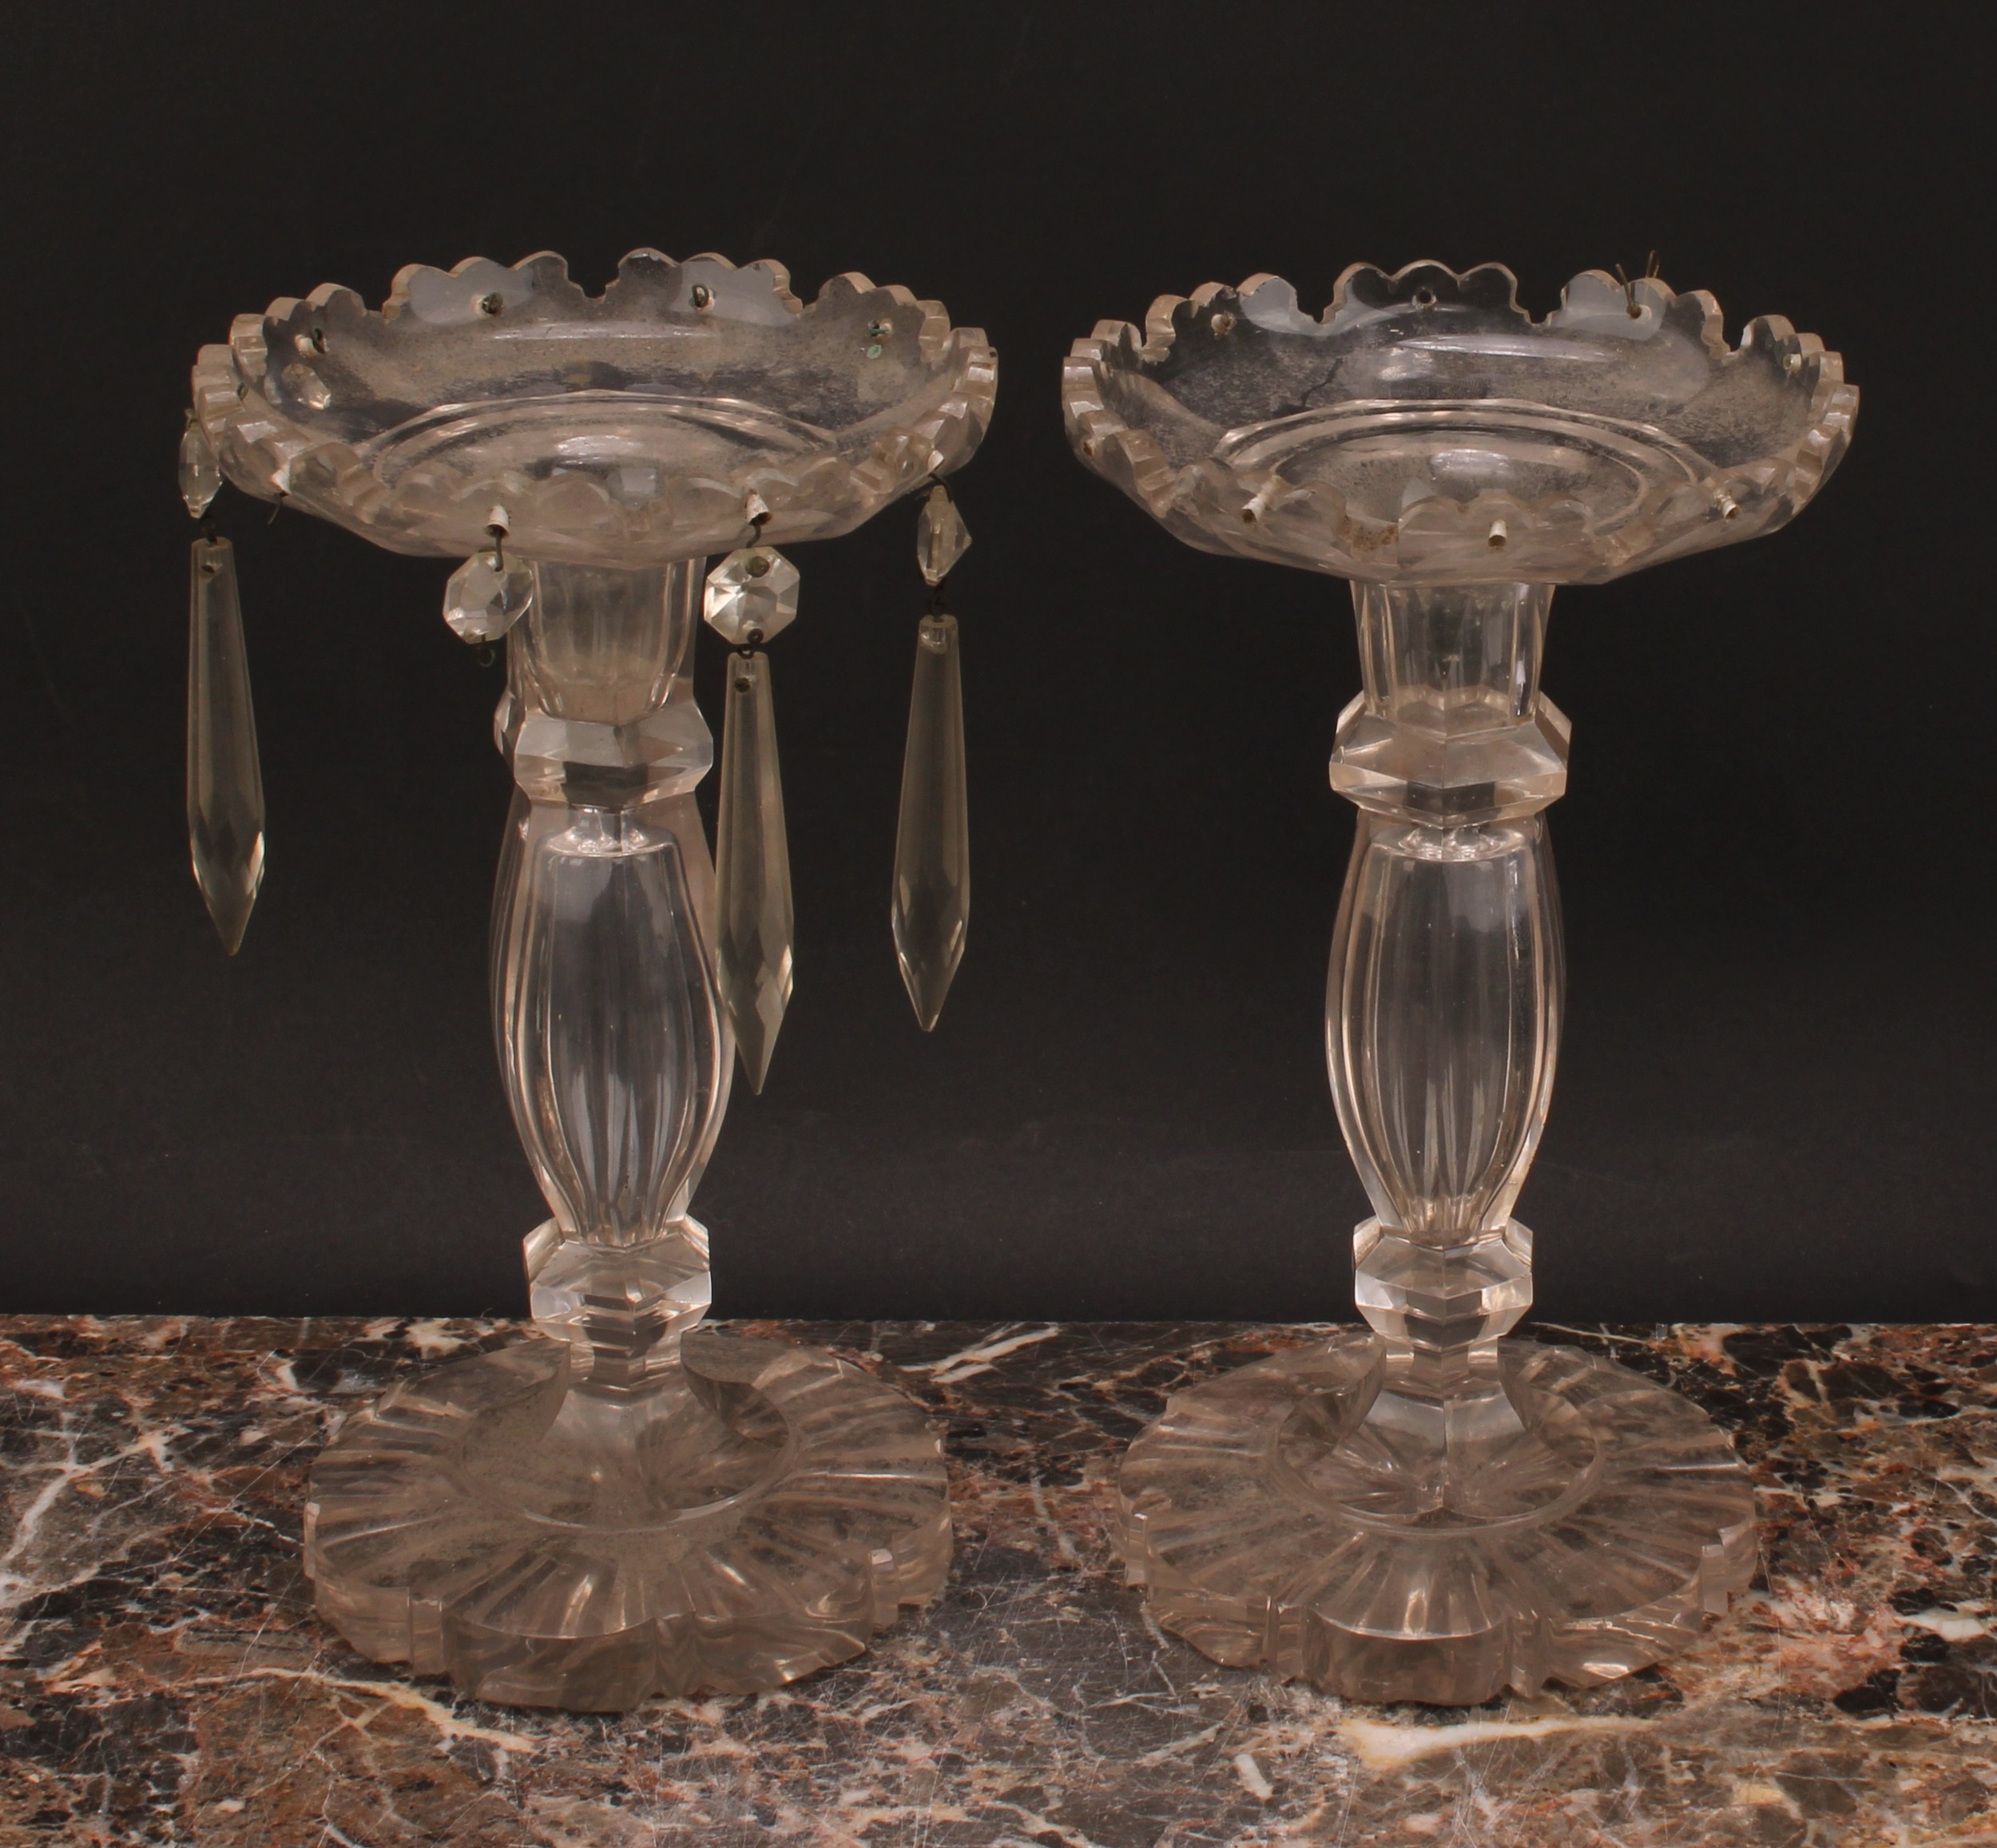 A pair of late 19th century clear glass lustres, 21.5cm high, c.1890 - Image 2 of 2